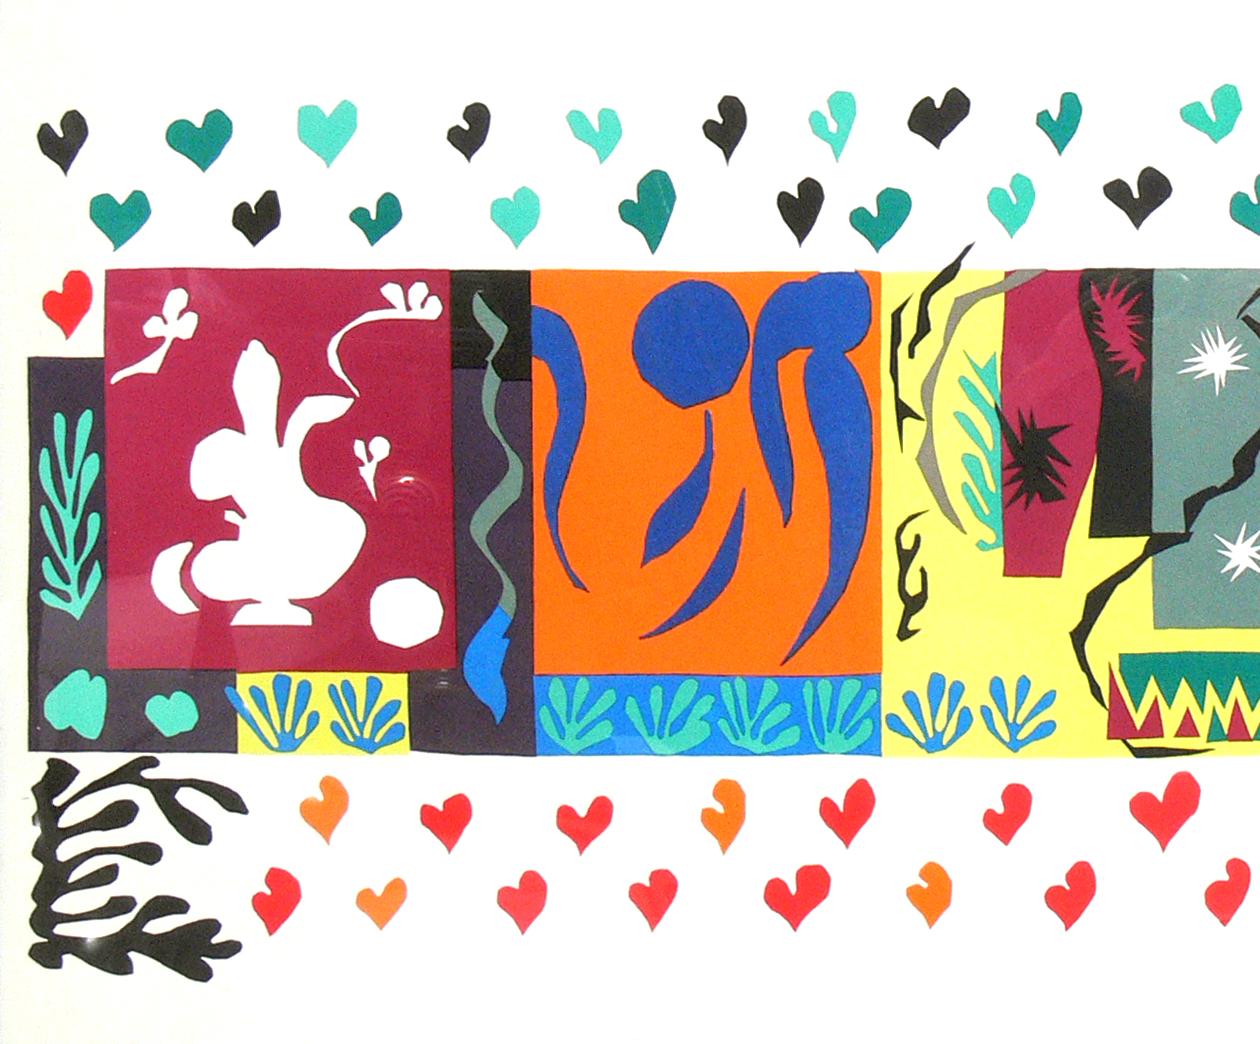 Vibrant color Henri Matisse Lithograph, circa 1970s. It has been framed in a clean lined black lacquered wood gallery frame under UV resistant glass.